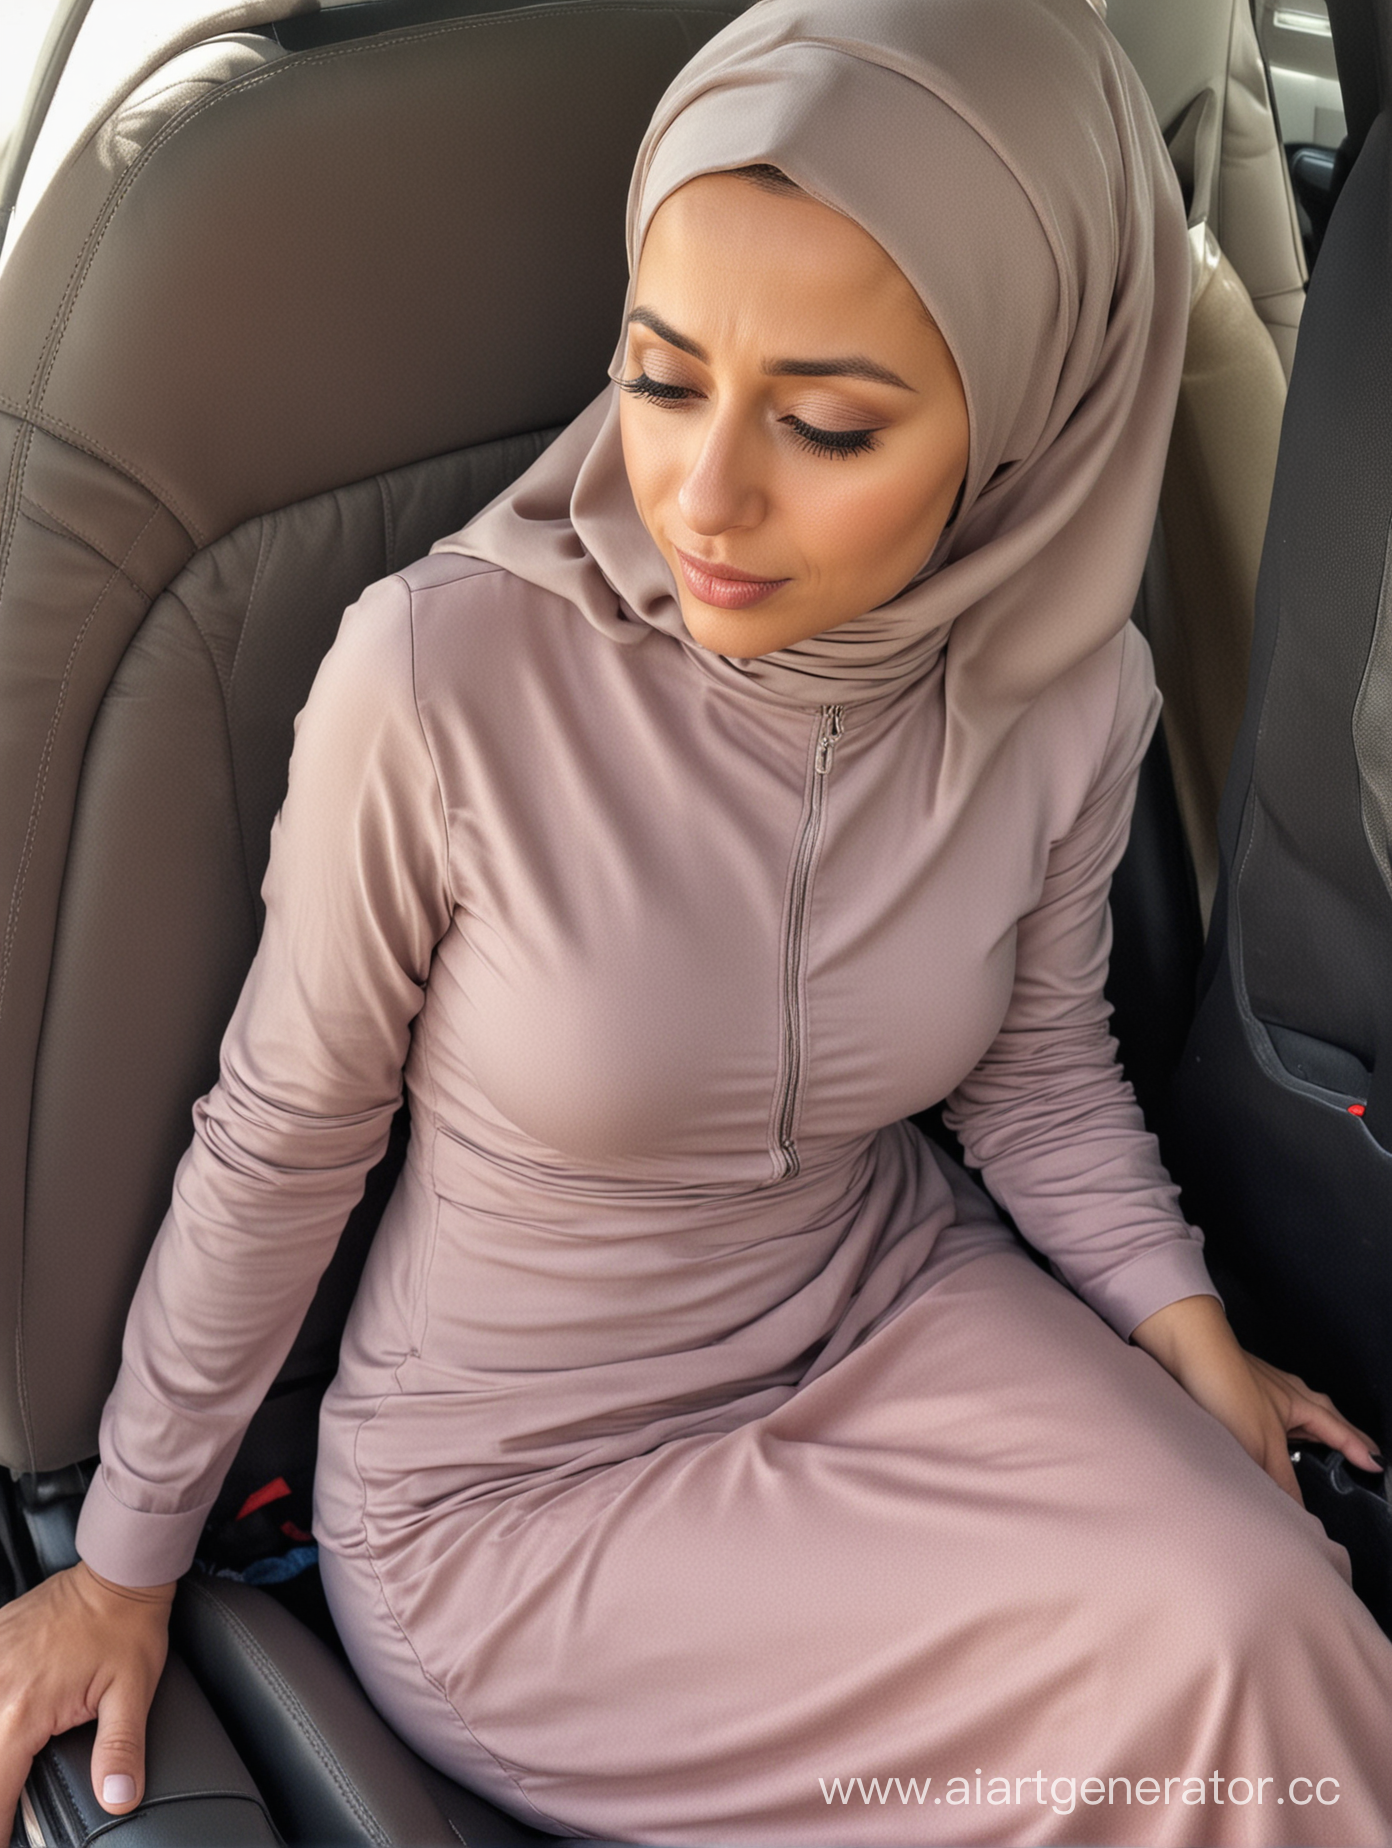 A short woman, 40 years old, hijab, tight dress, sits car seat, from above, top view, arabian, hairless, plump body. She is in pain. Tight tits